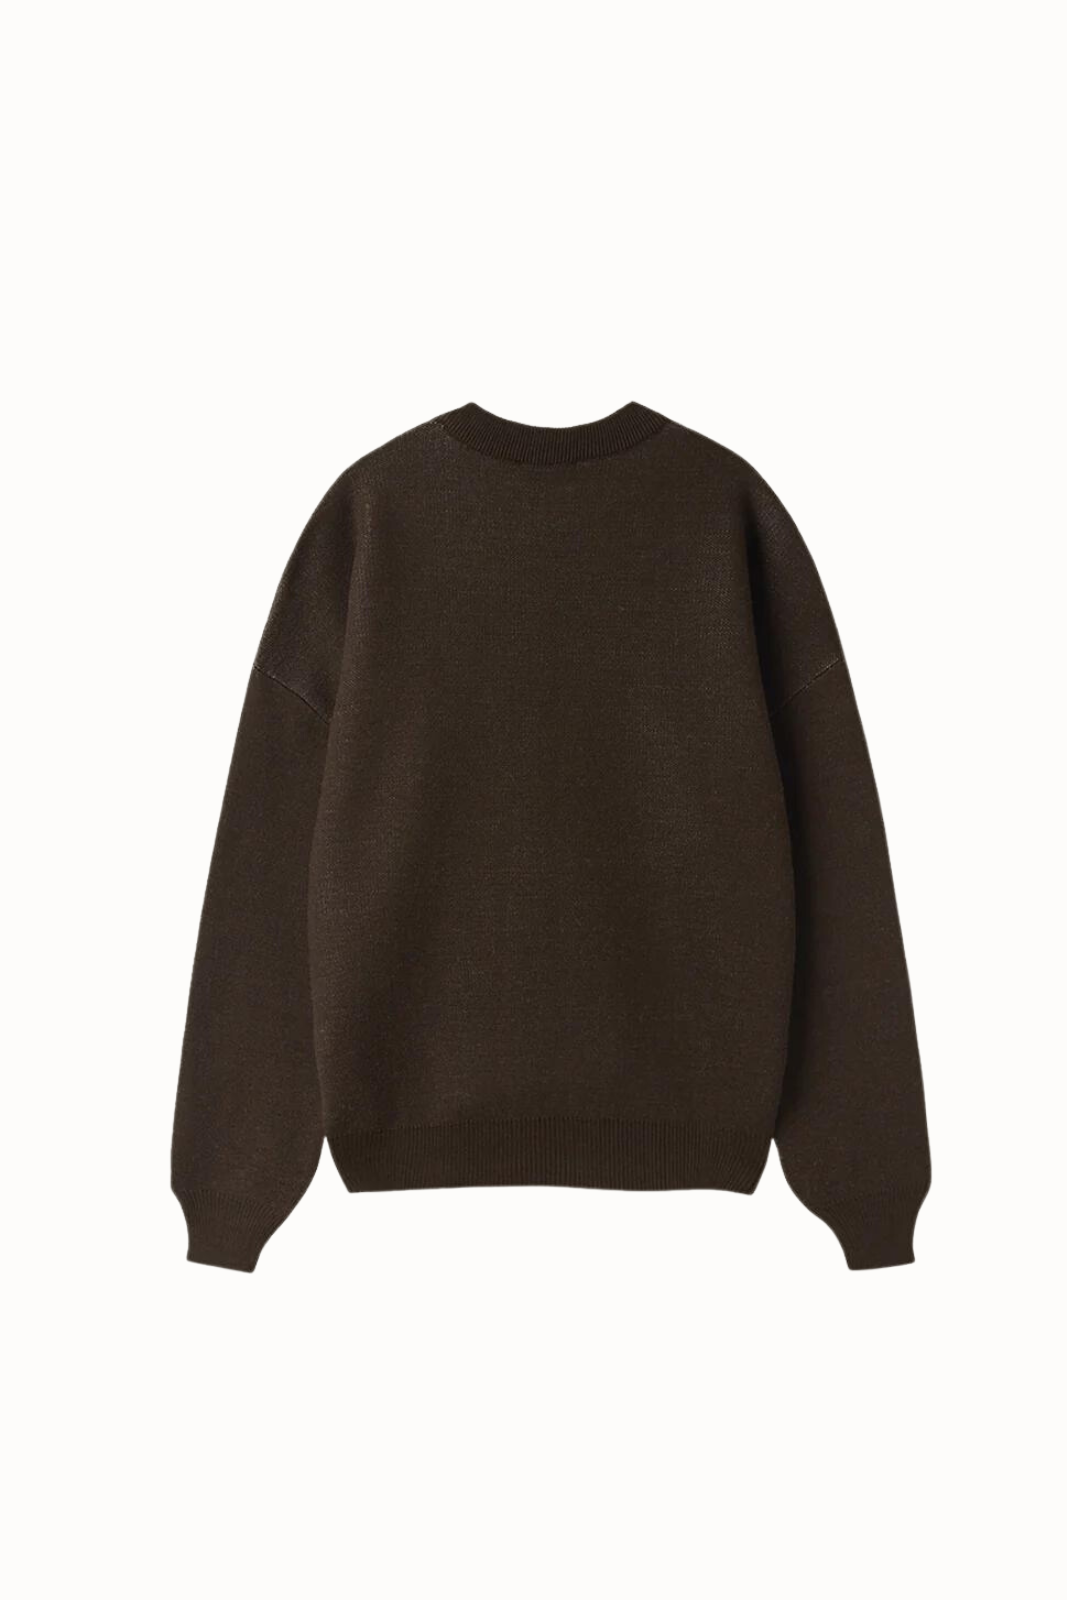 Knit Crew - Chocolate Brown